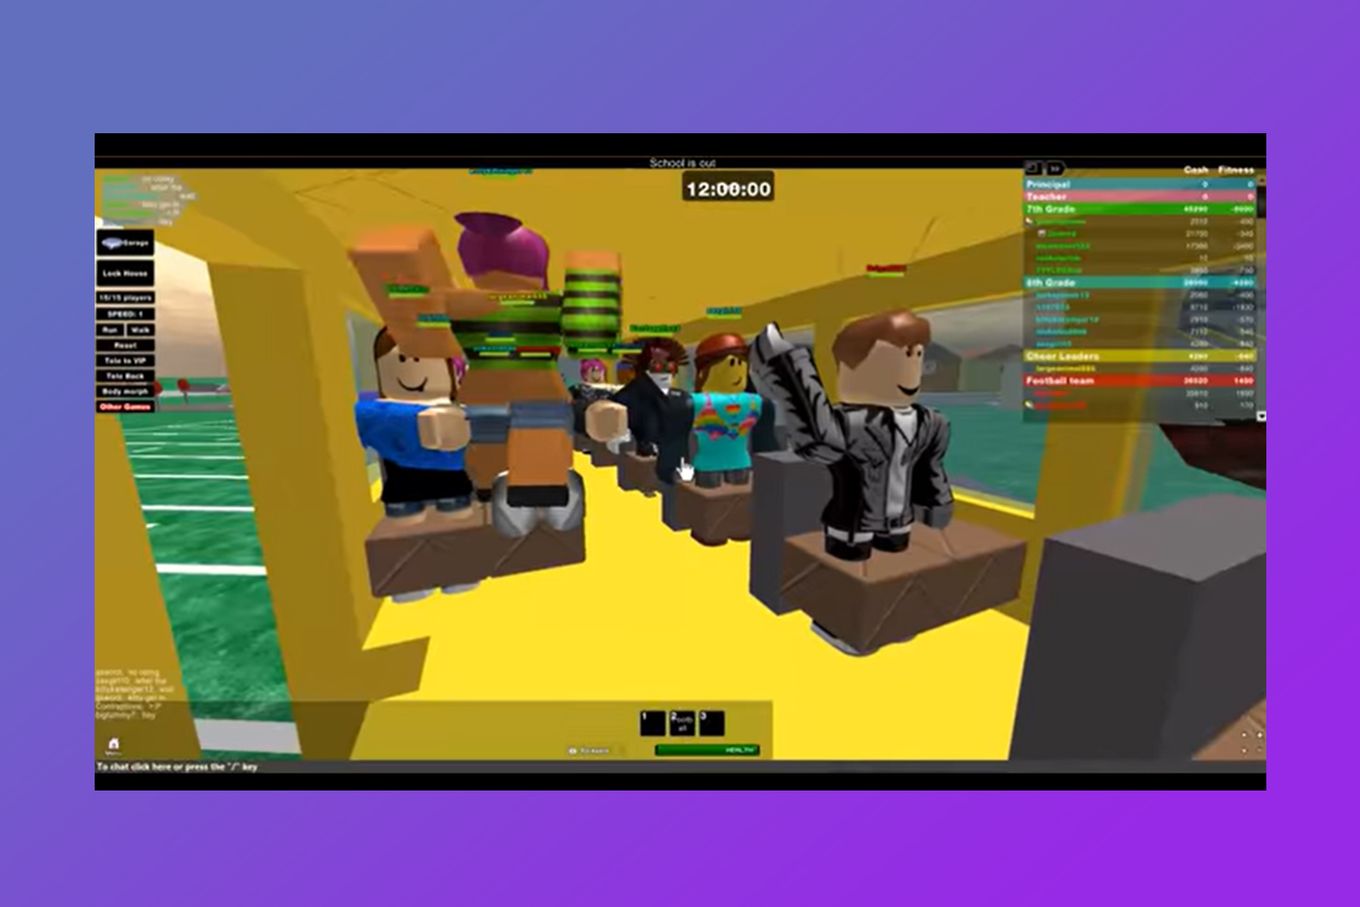 20 Most Popular Roblox Games in 2023